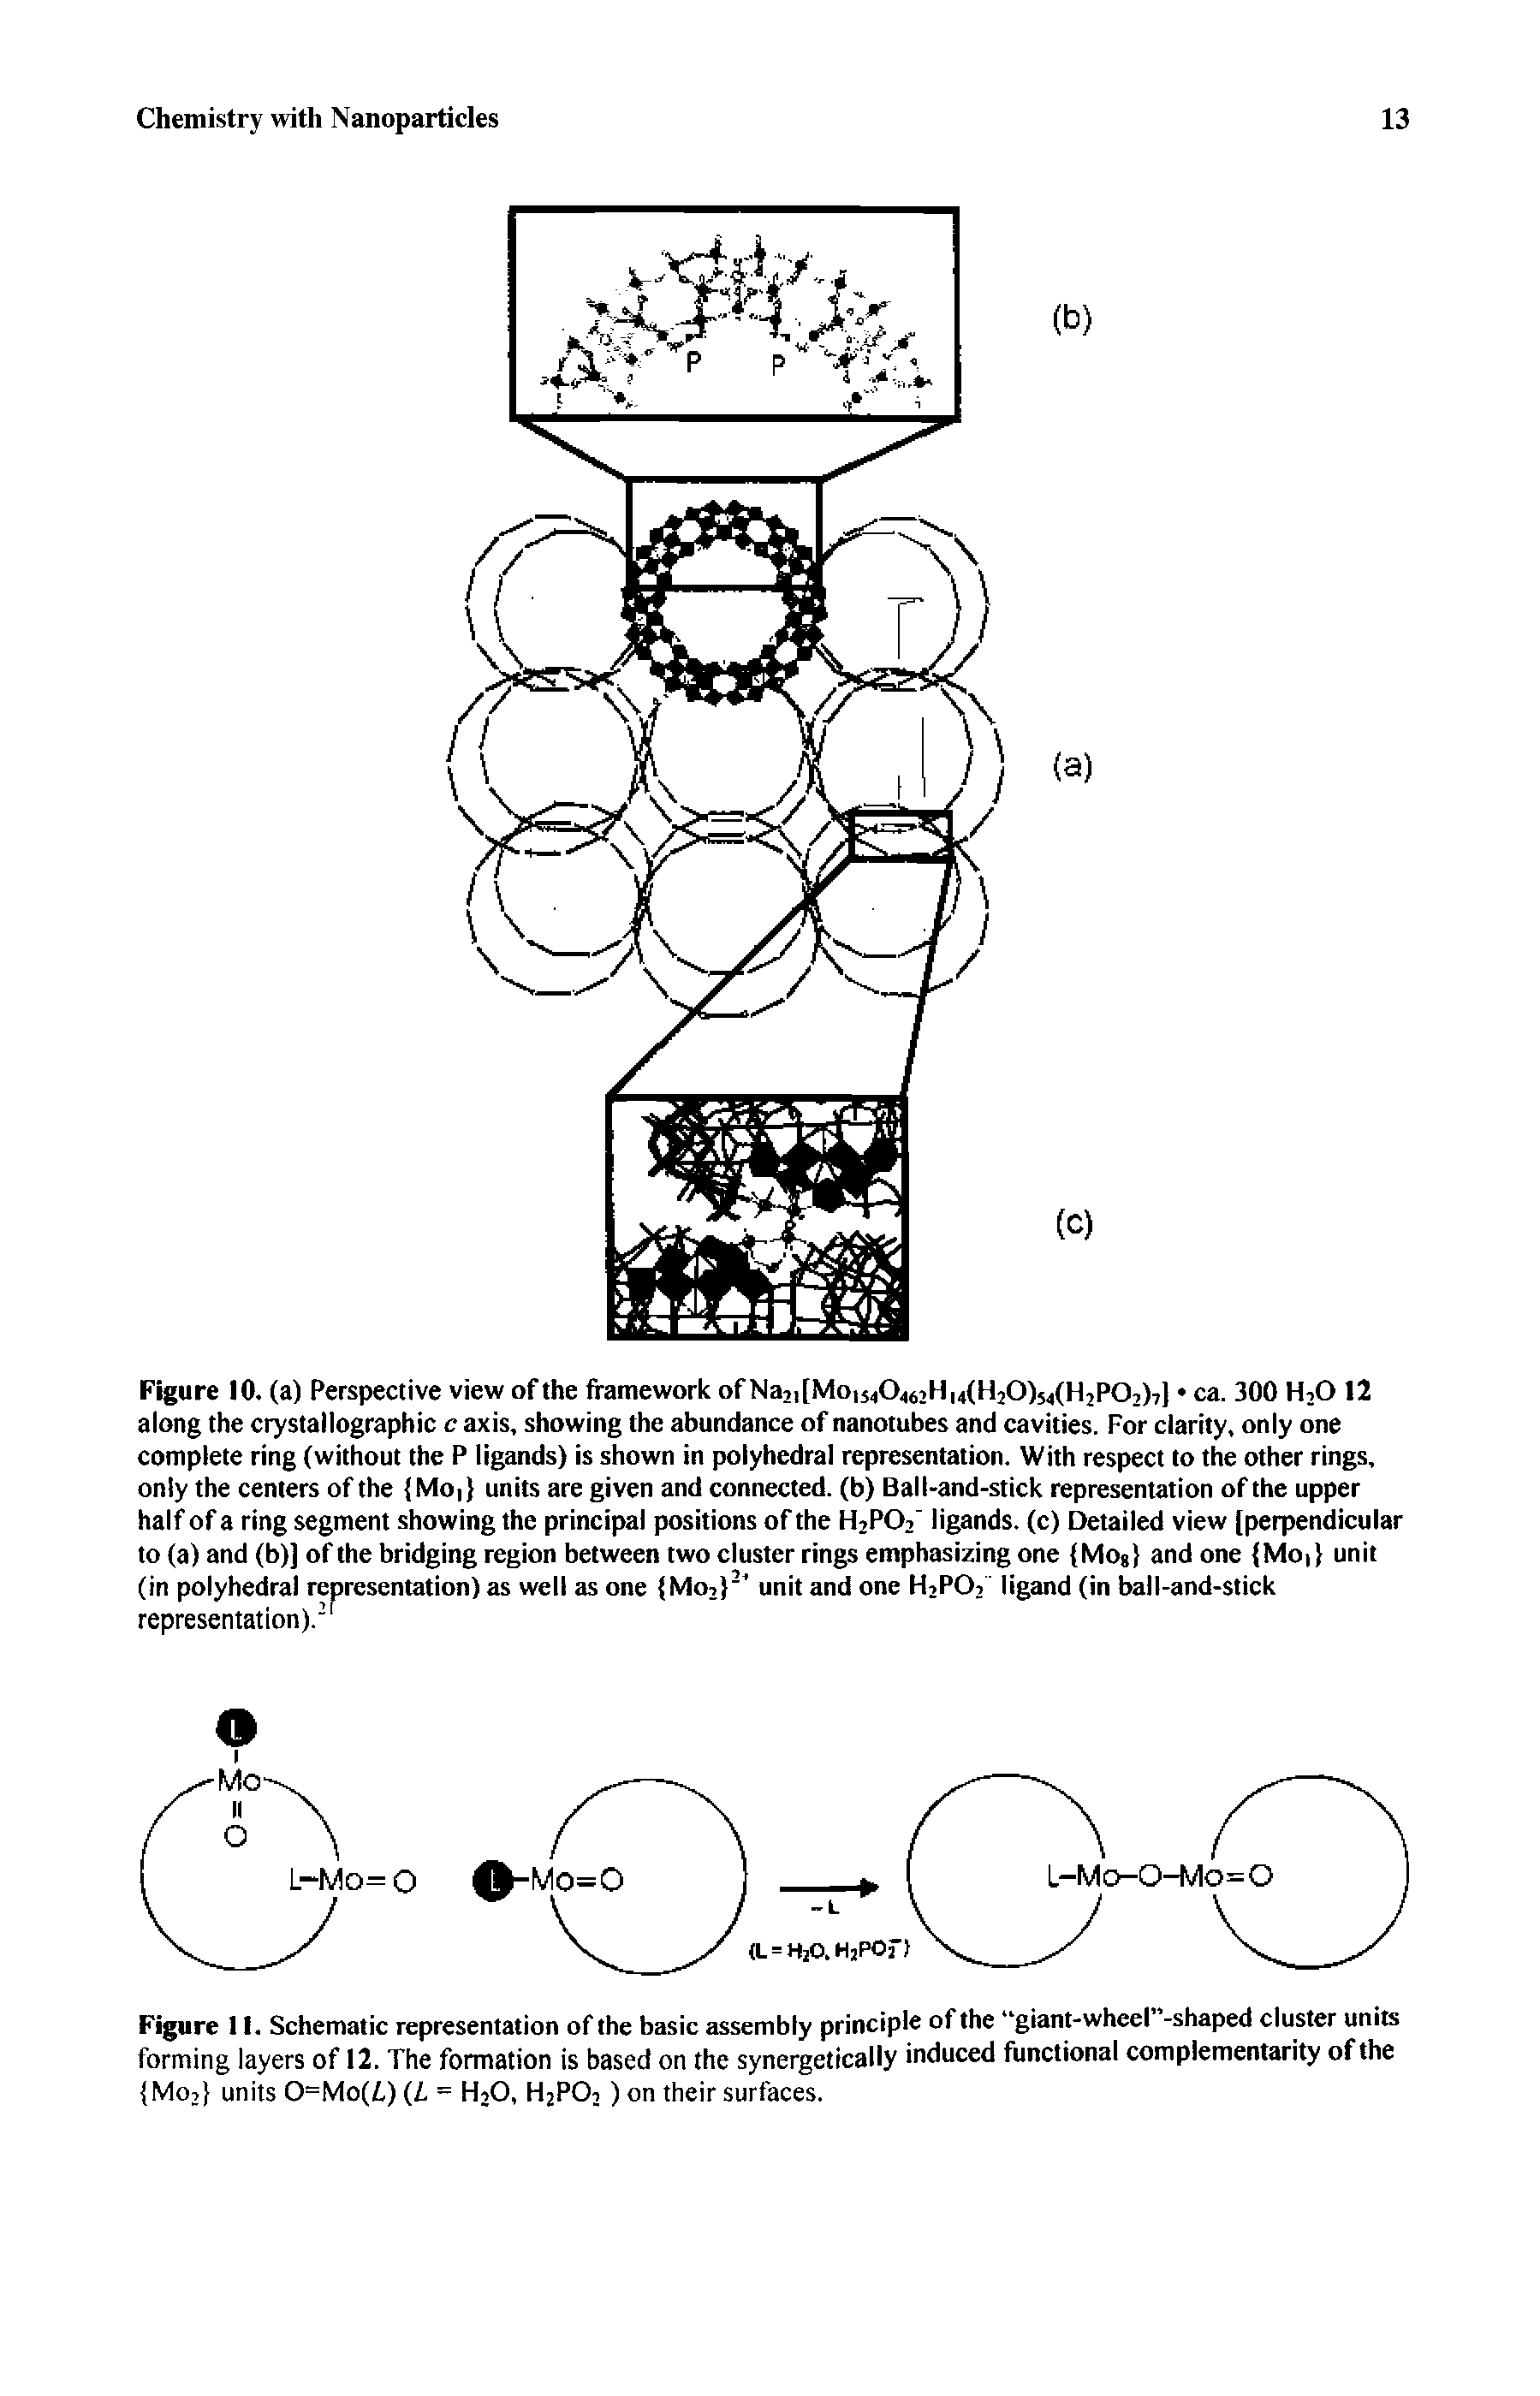 Figure 11. Schematic representation of the basic assembly principle of the giant-wheel -shaped cluster units forming layers of 12. The formation is based on the synergetically induced functional complementarity of the...